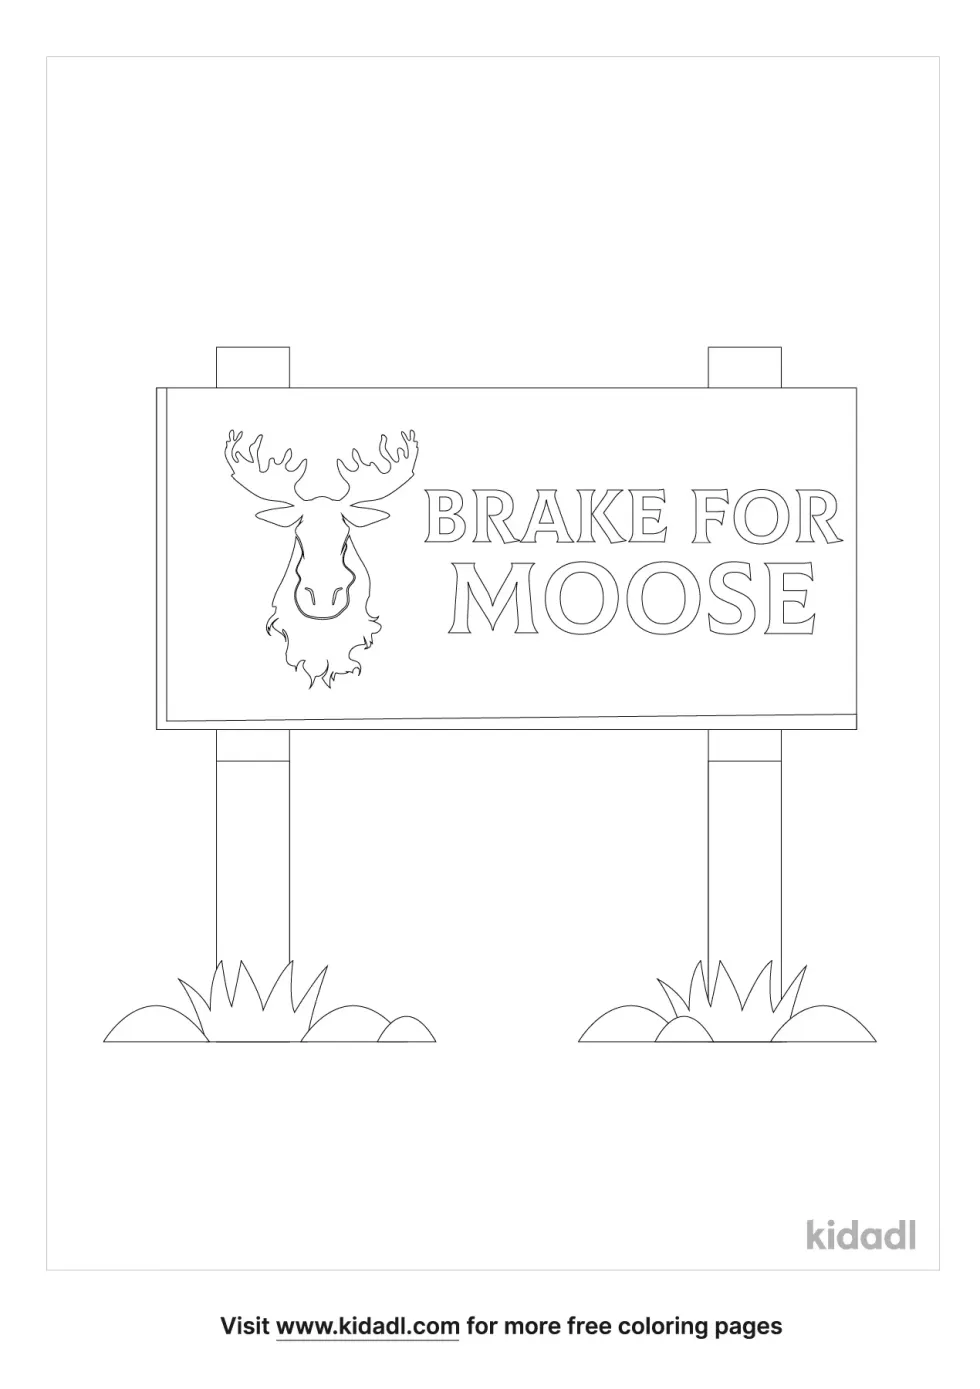 Brake For Moose Sign Coloring Page